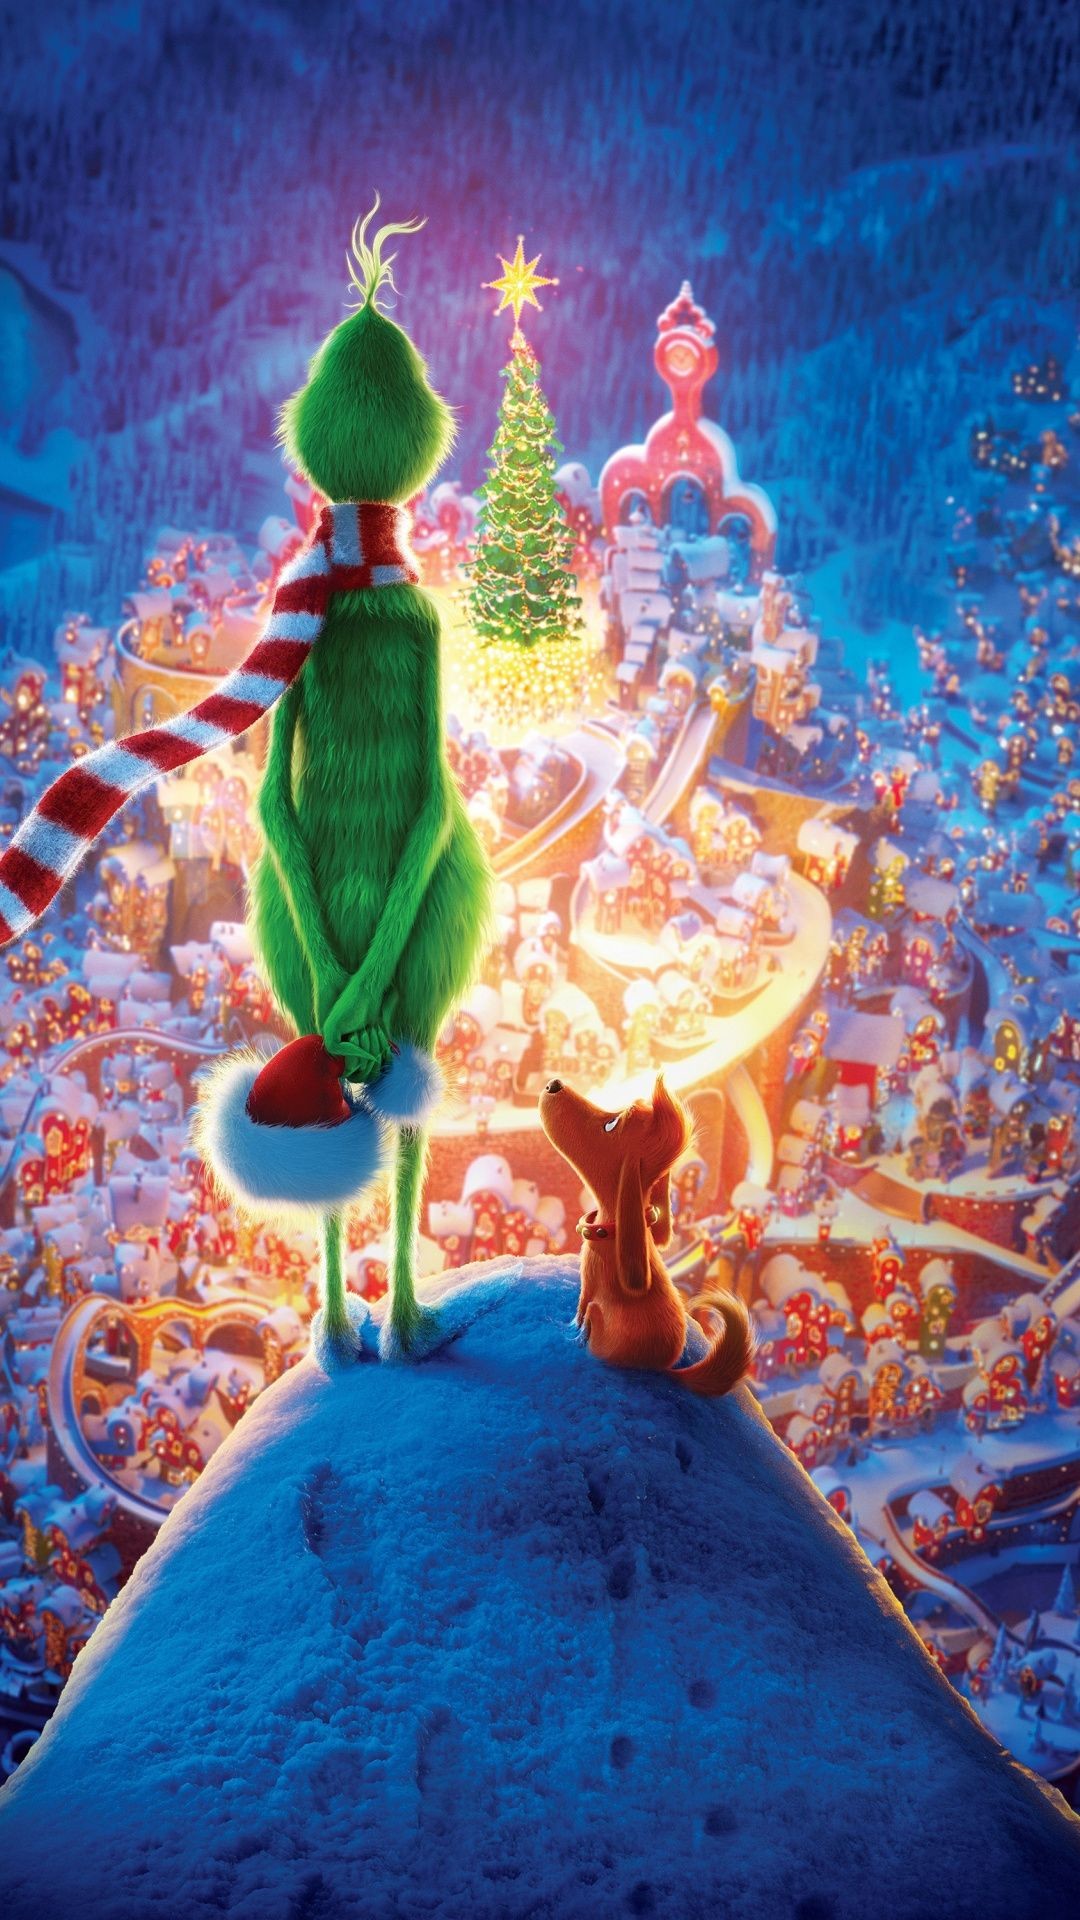 1080x1920 The Grinch, 2018 movie, Christmas,  wallpaper